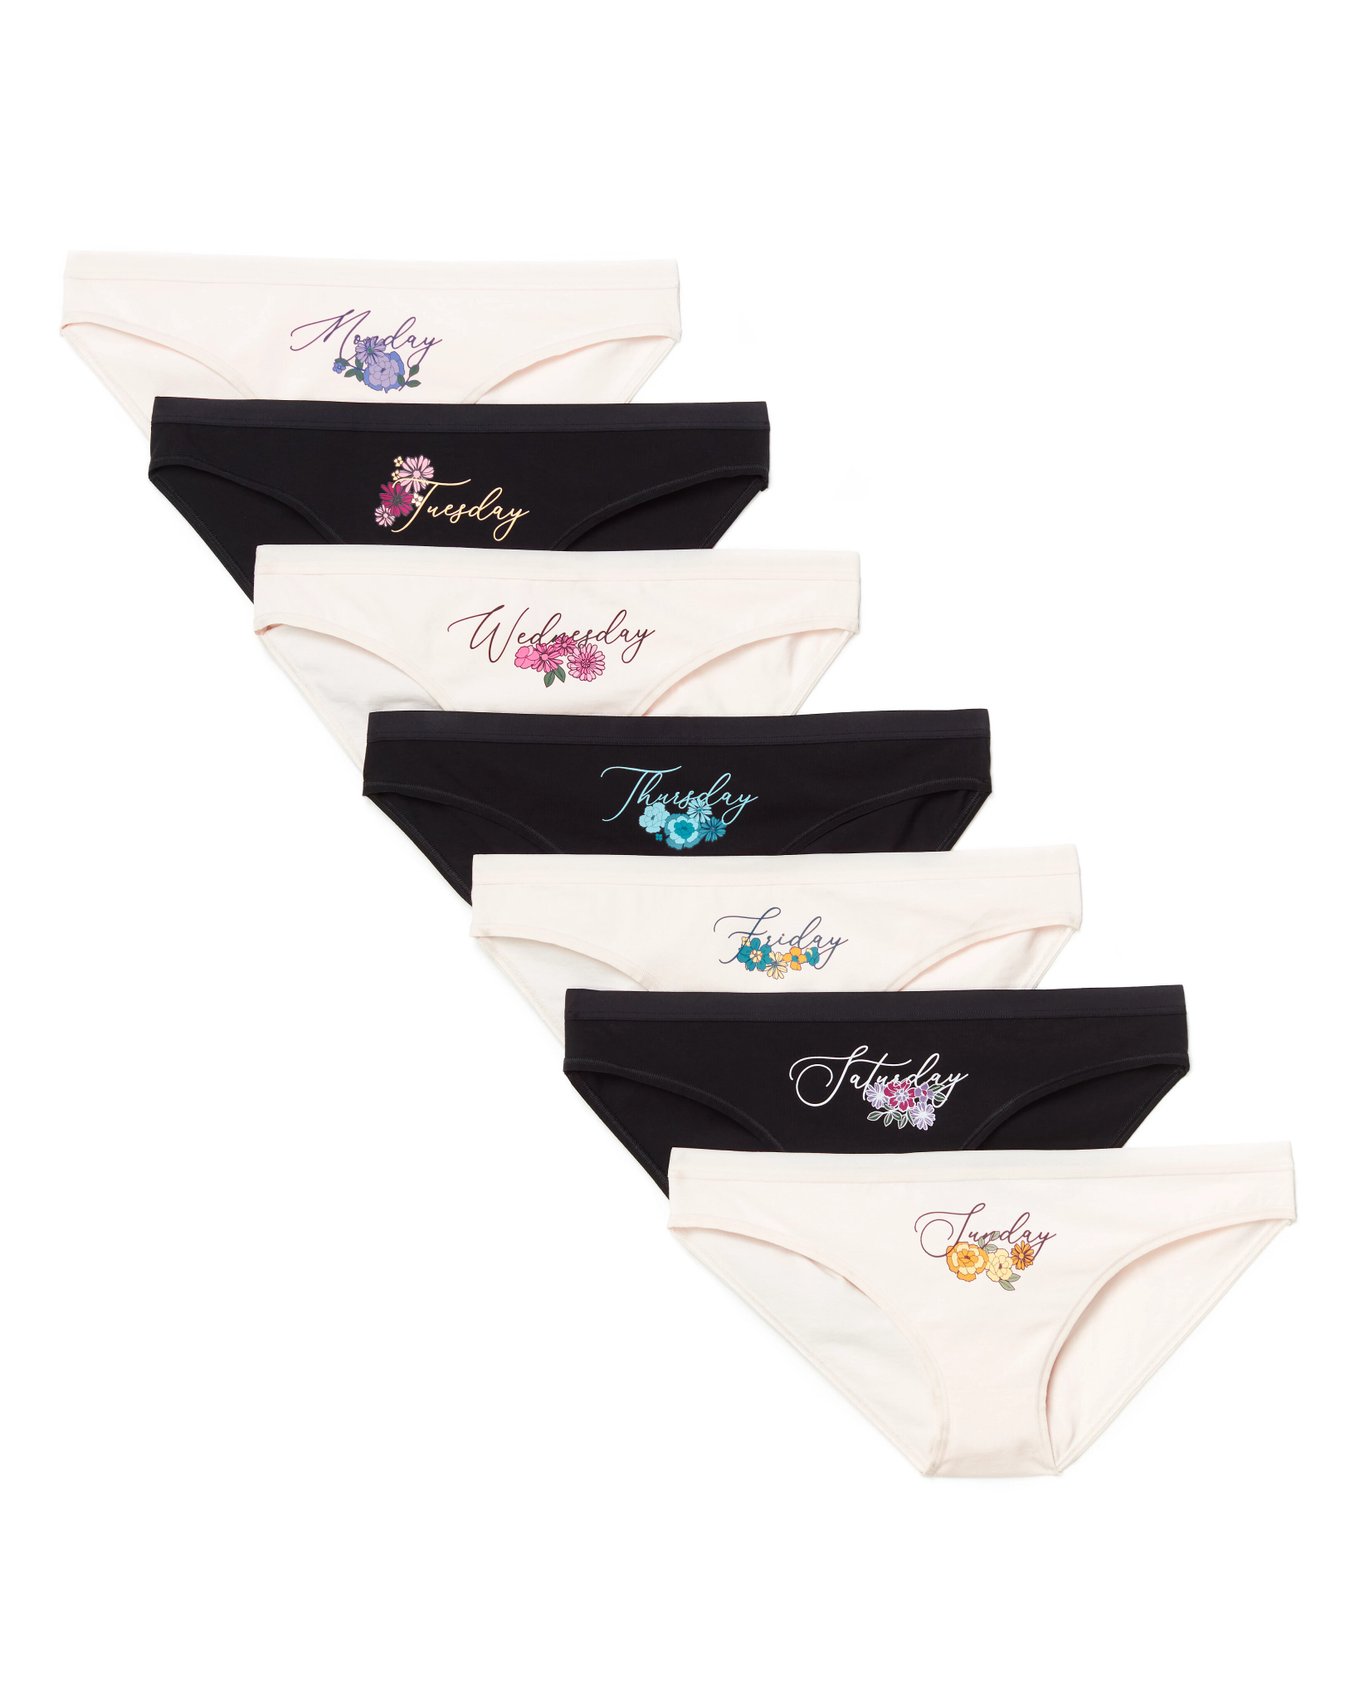 Cotton Breathable Cute Girl Briefs a Set of 7 Sweet Female Panties